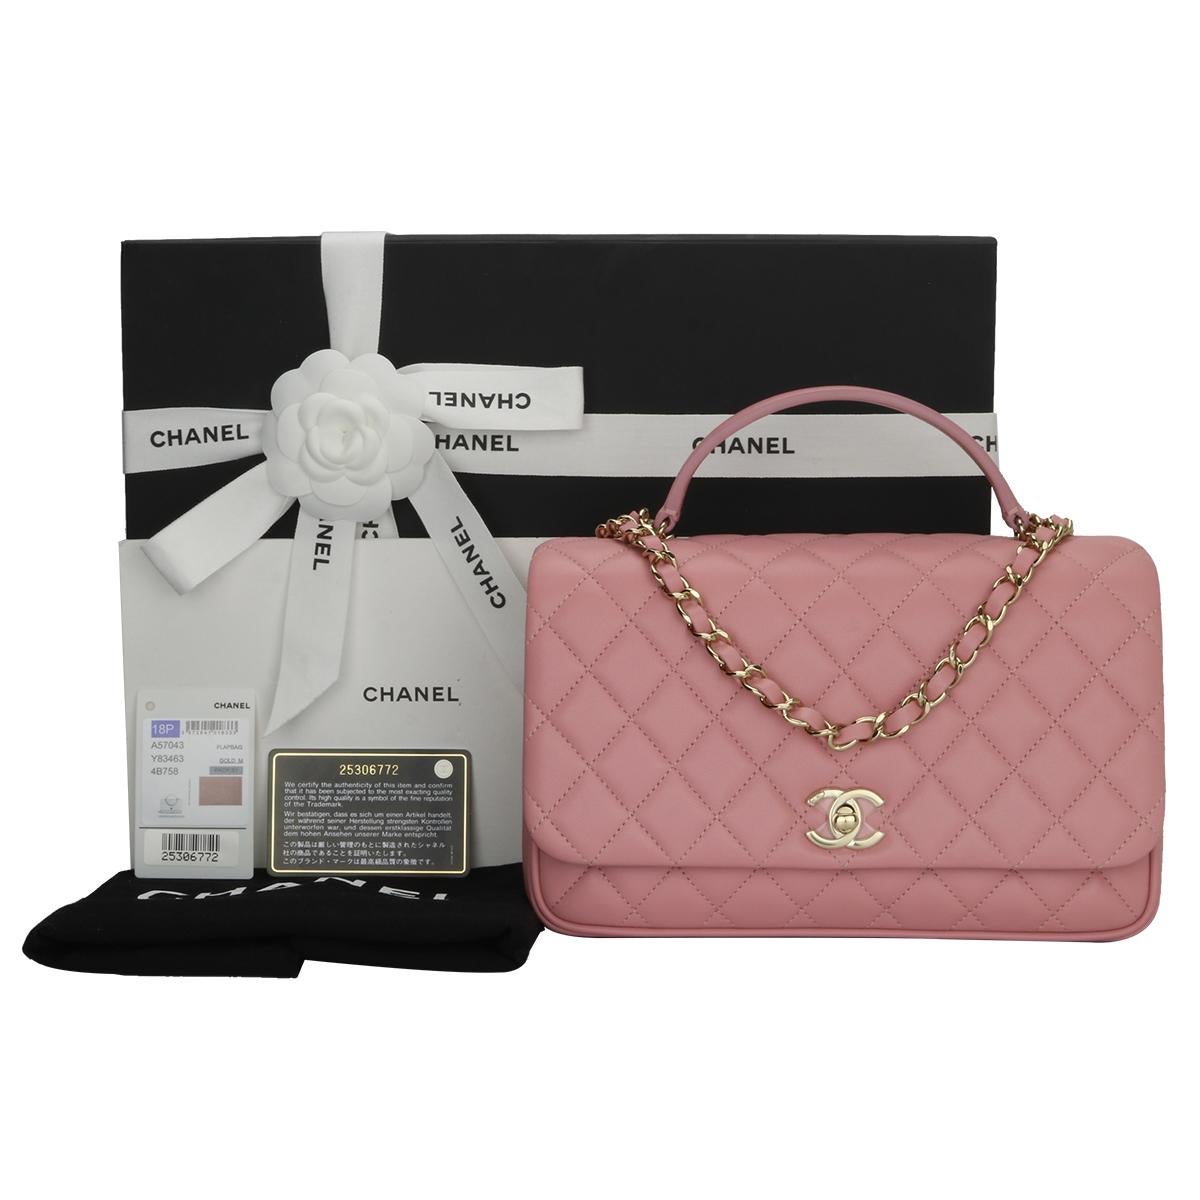 Authentic CHANEL Citizen Chic Medium Flap Bag Pink Lambskin with Gold Hardware 2018.

This stunning bag is in a brand new condition, the bag still holds its original shape, and the hardware is still very shiny.

Exterior Condition: Pristine